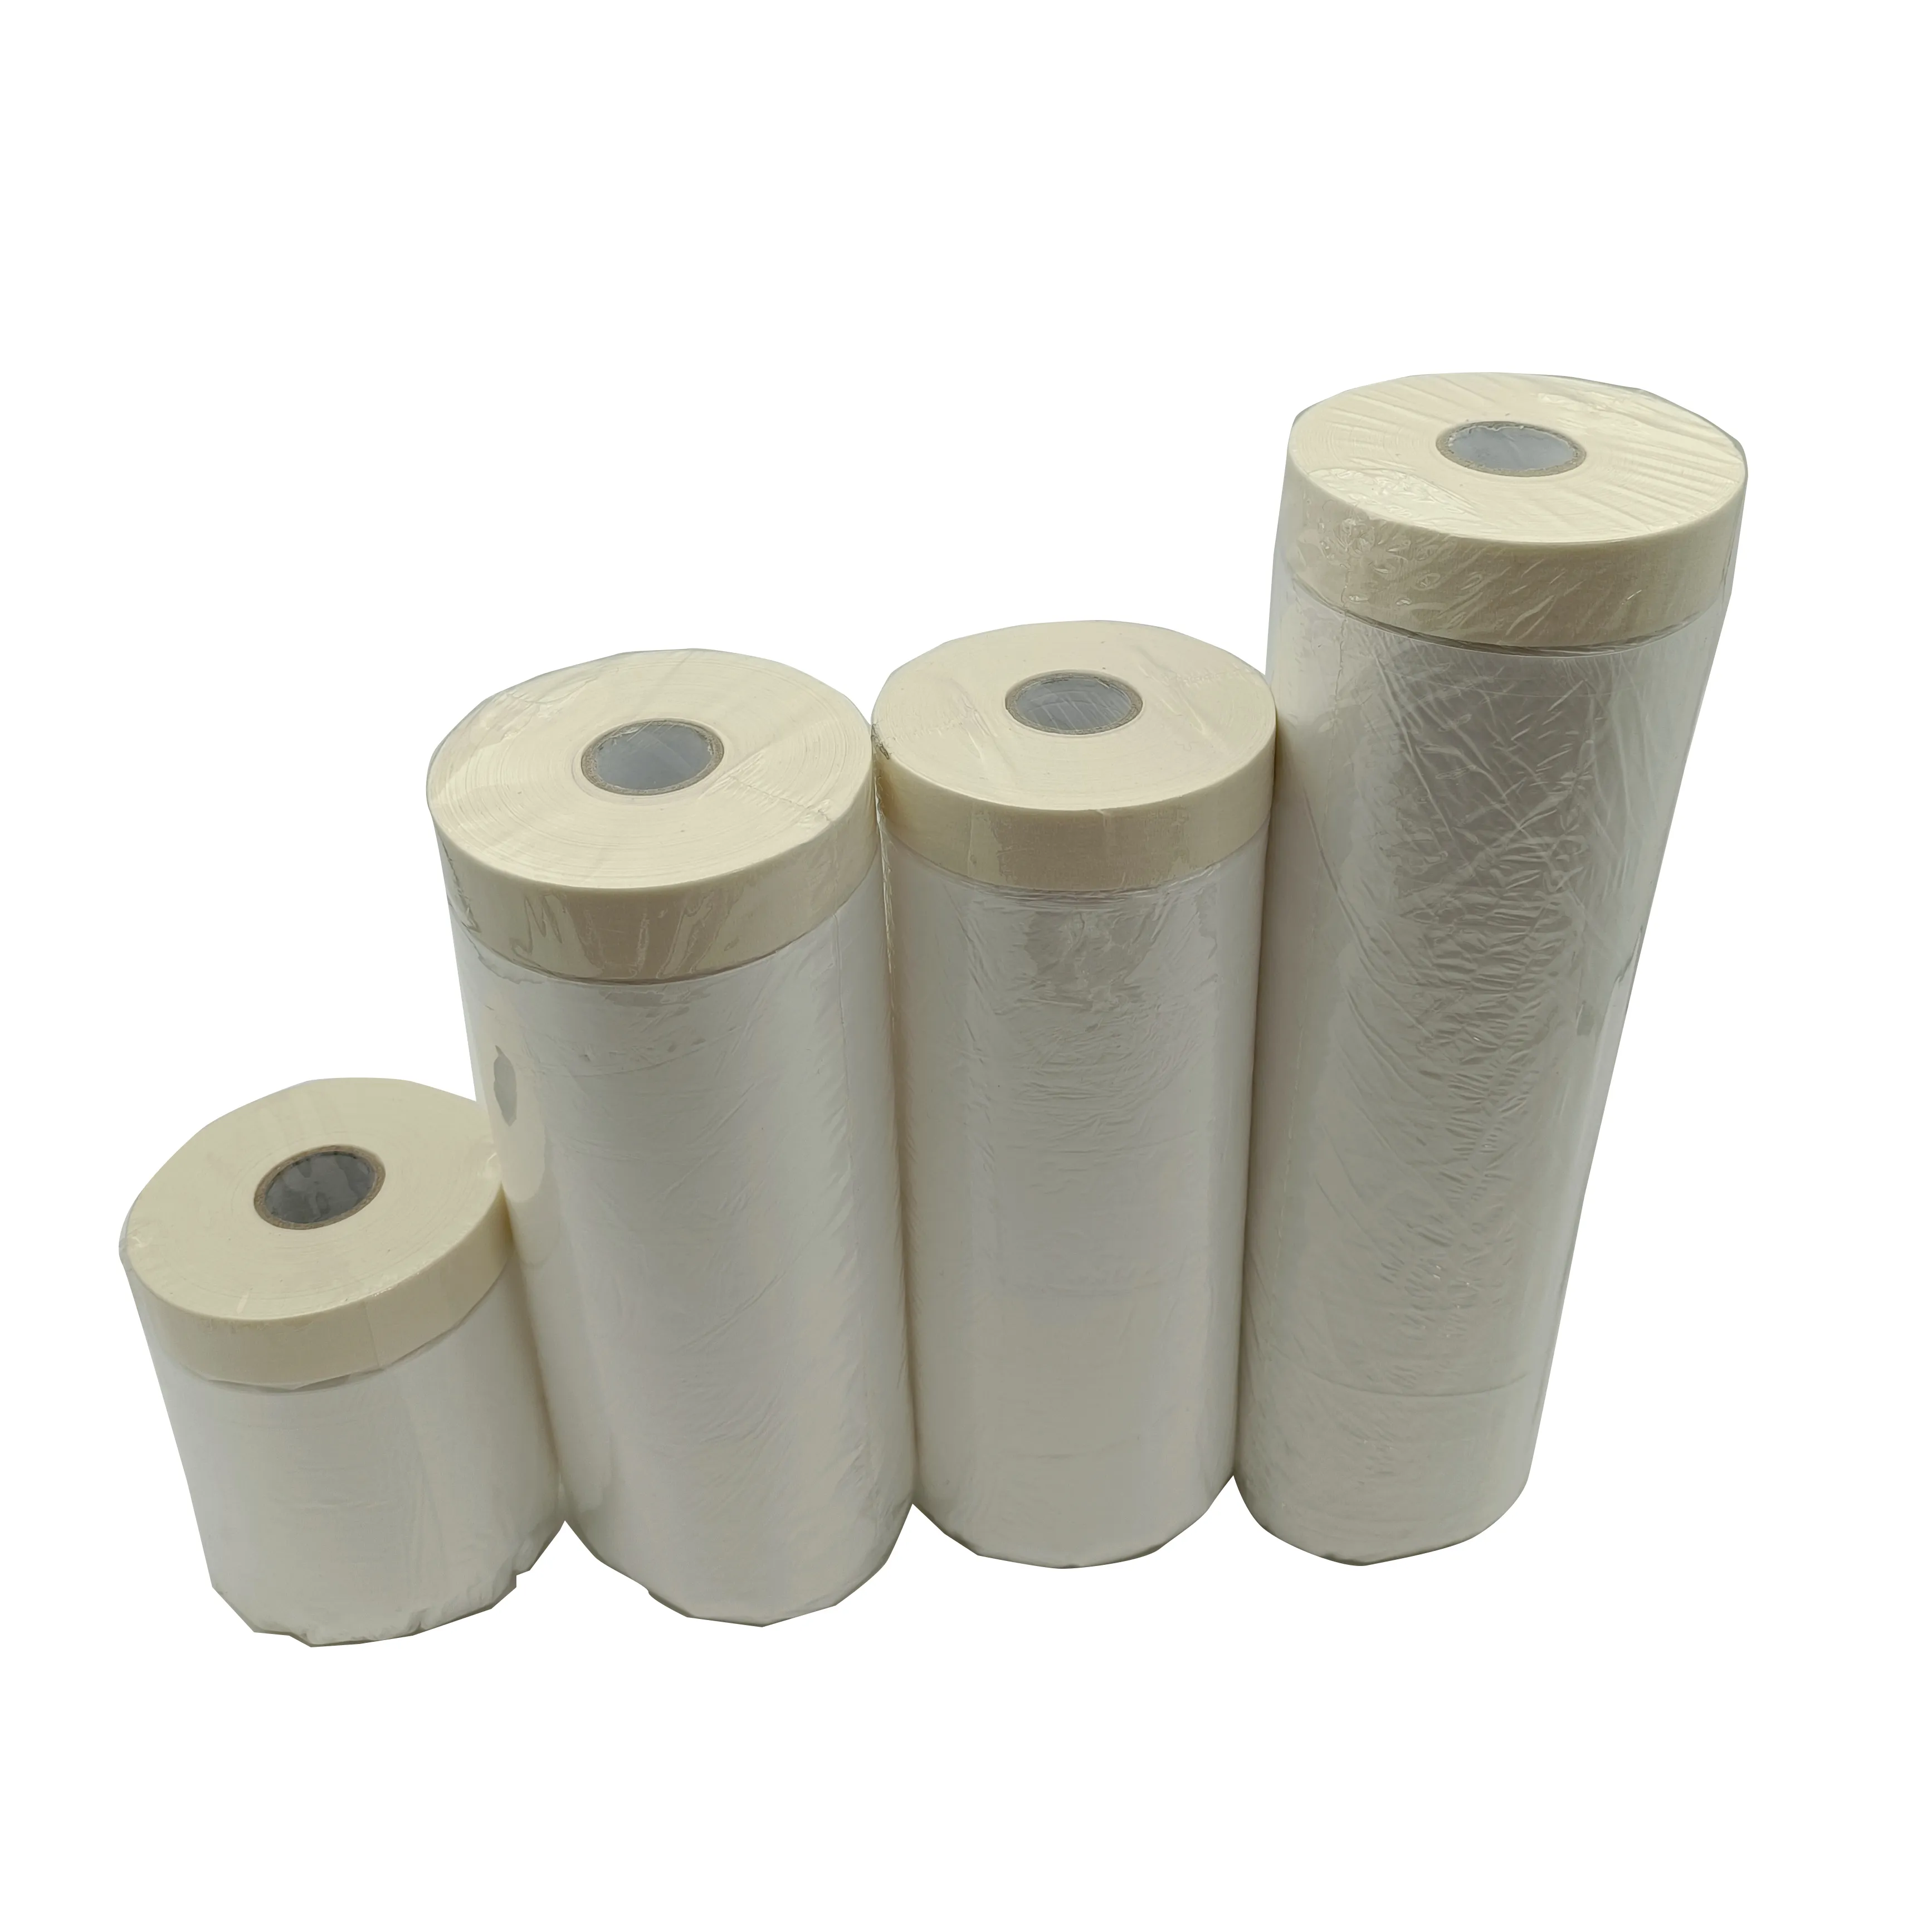 Tape and Drape, Pre-Taped Masking Film for Automotive Painting Covering, Assorted Masking Paper